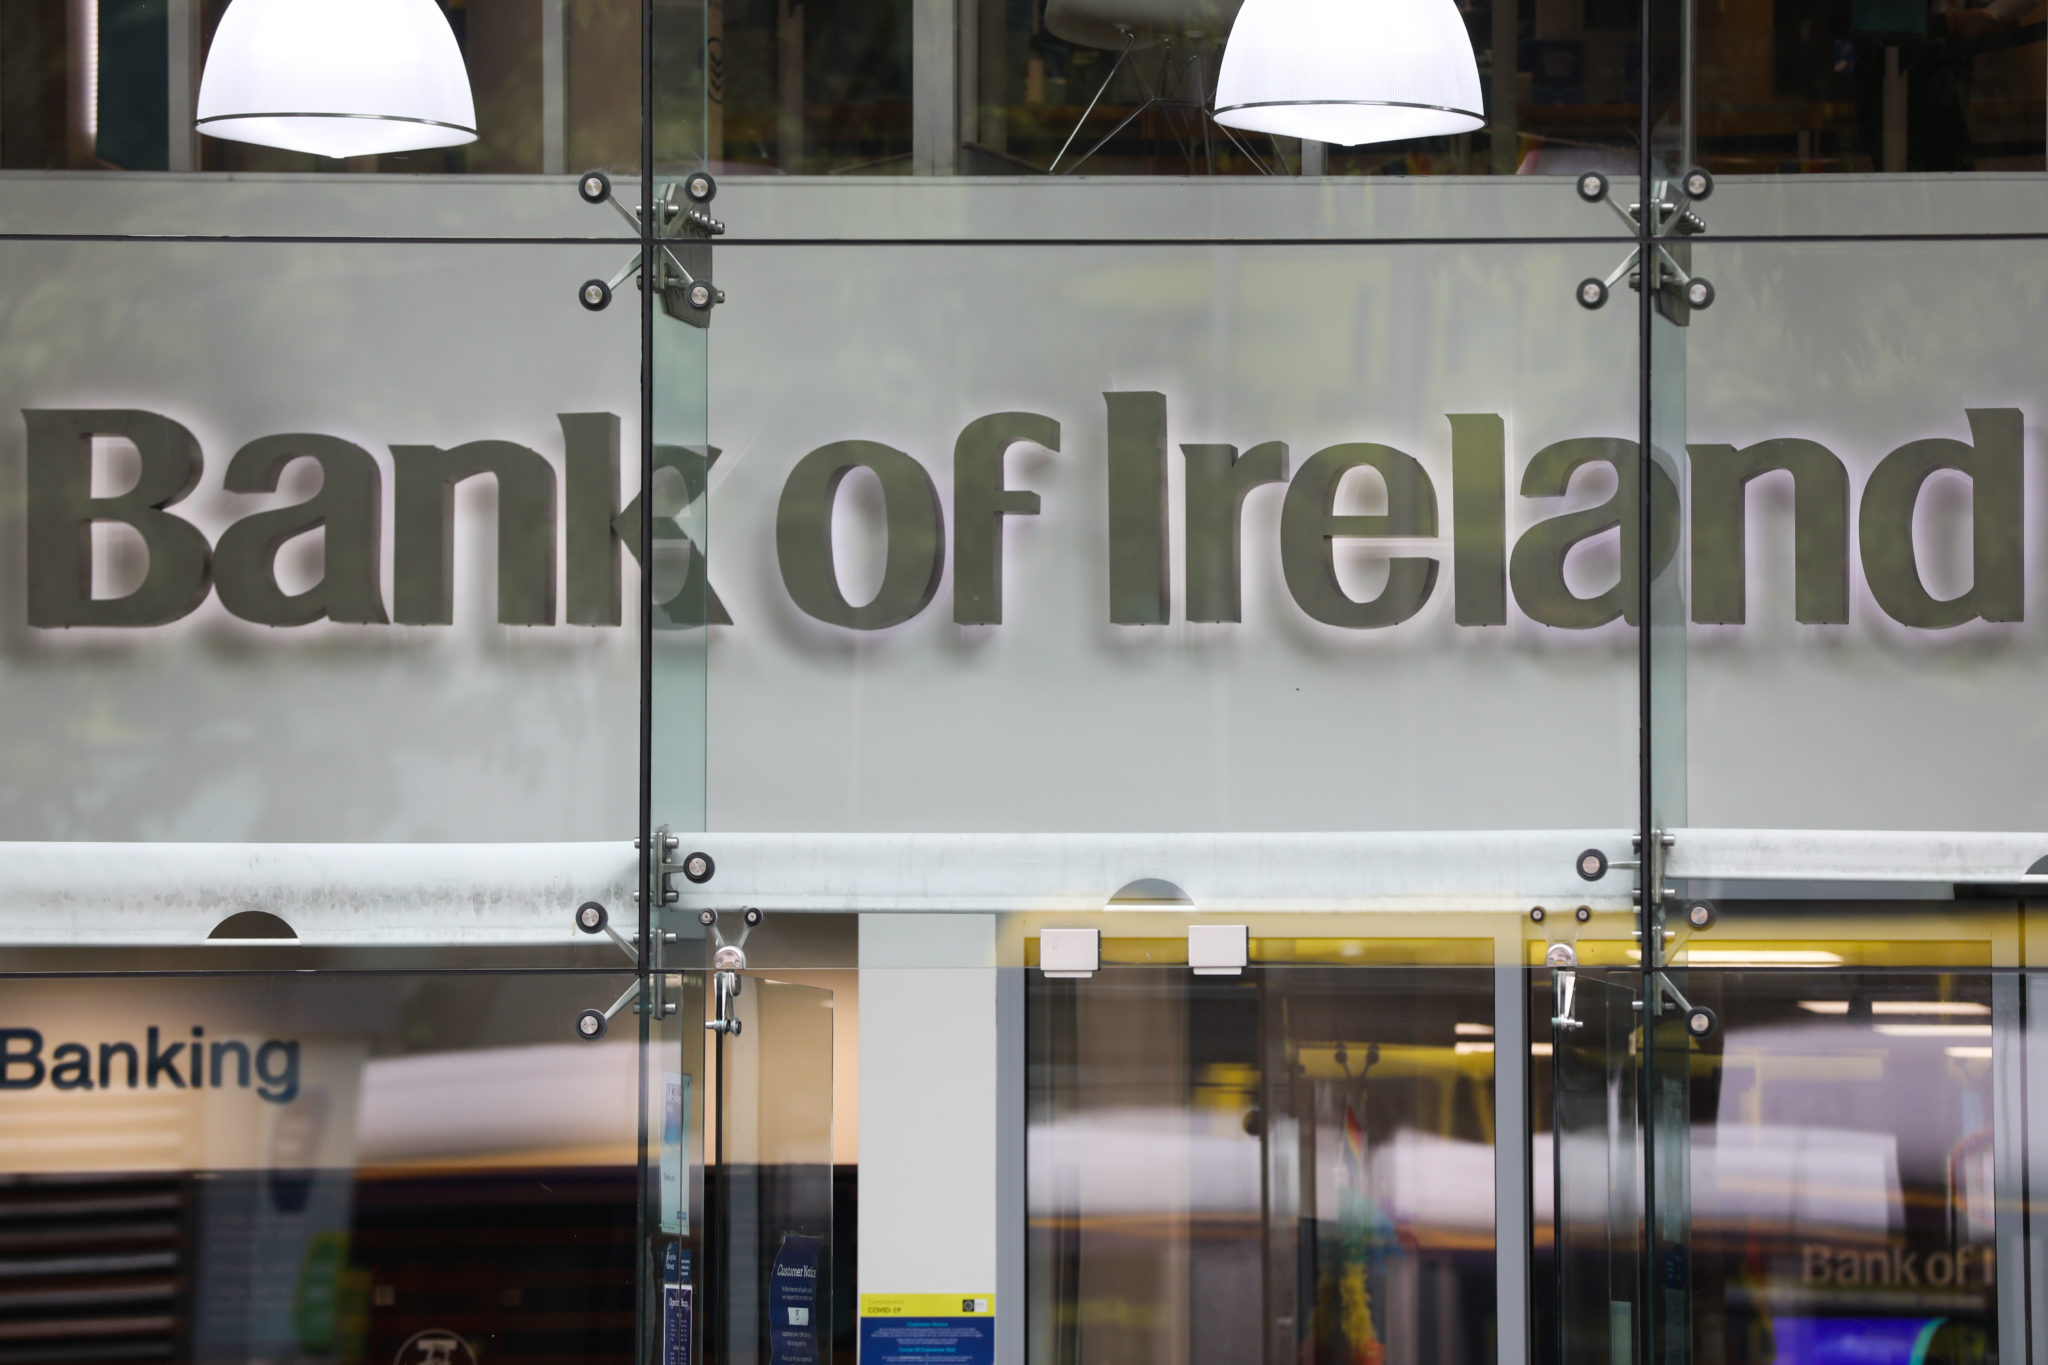 A Bank of Ireland branch on O'Connell Street, Dublin in June 2021.